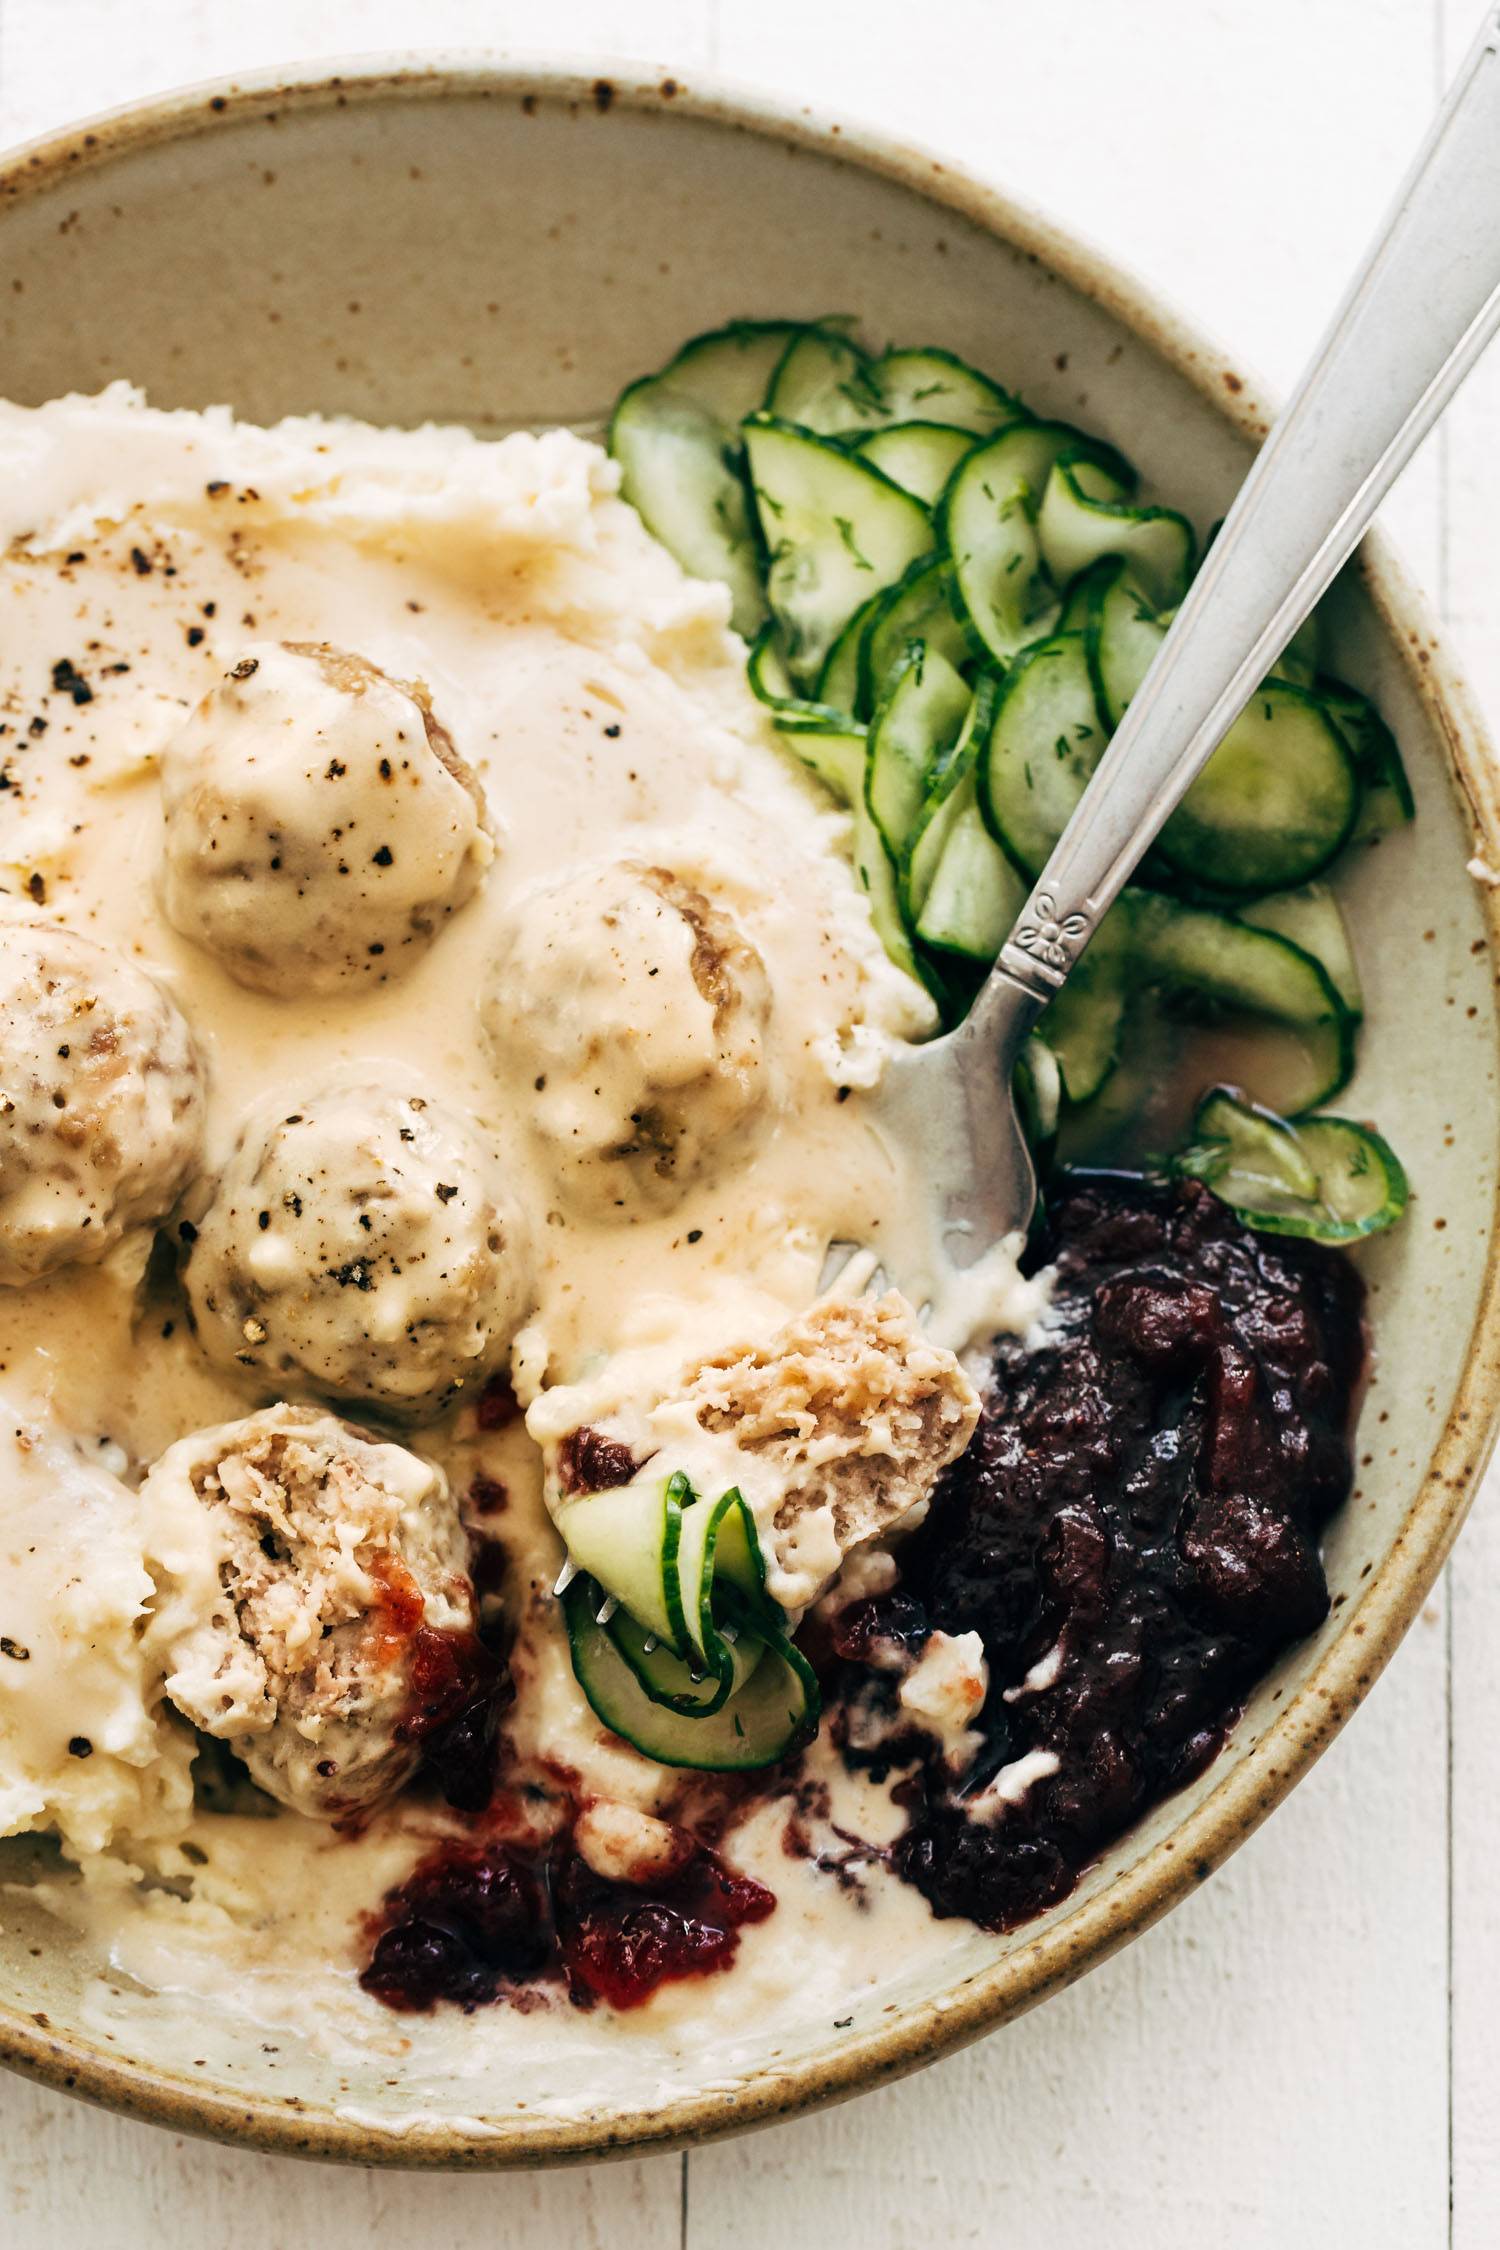 Swedish meatballs in a bowl with cucumbers and cranberries.